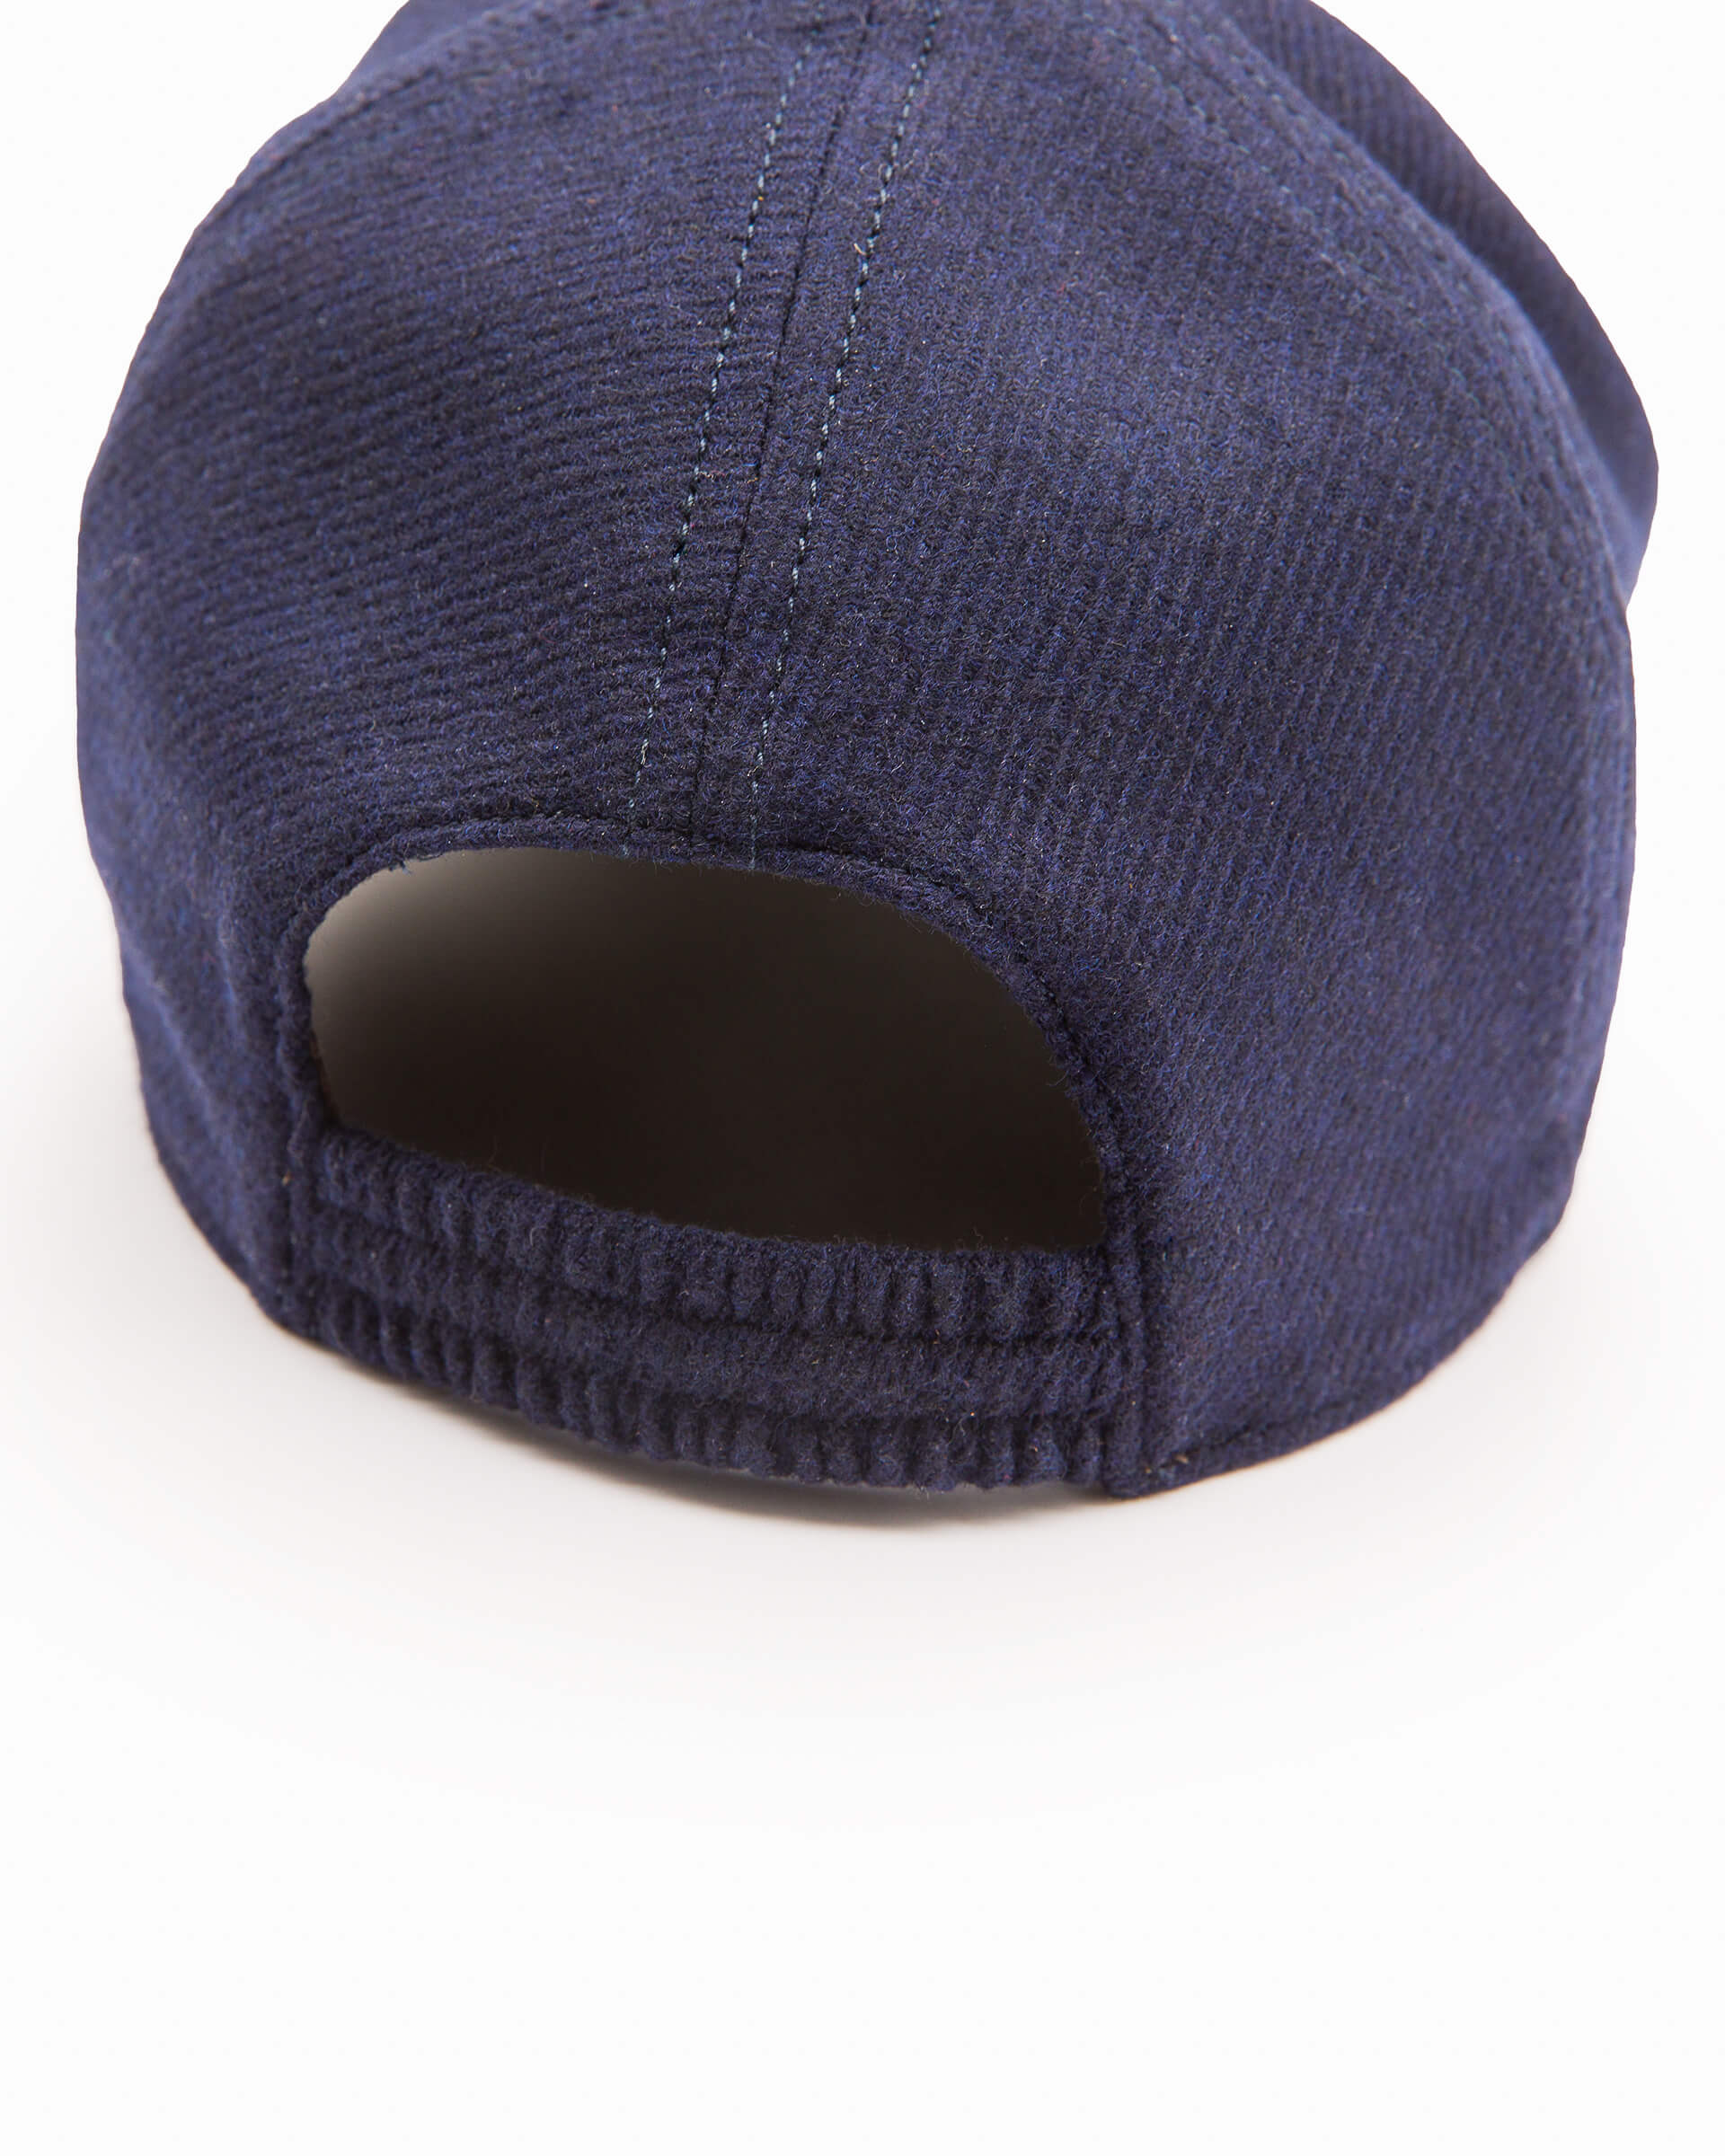 Baseball cap made of Andrea blue water-repellent hat with eclipse Firenze - cashmere visor Ventura